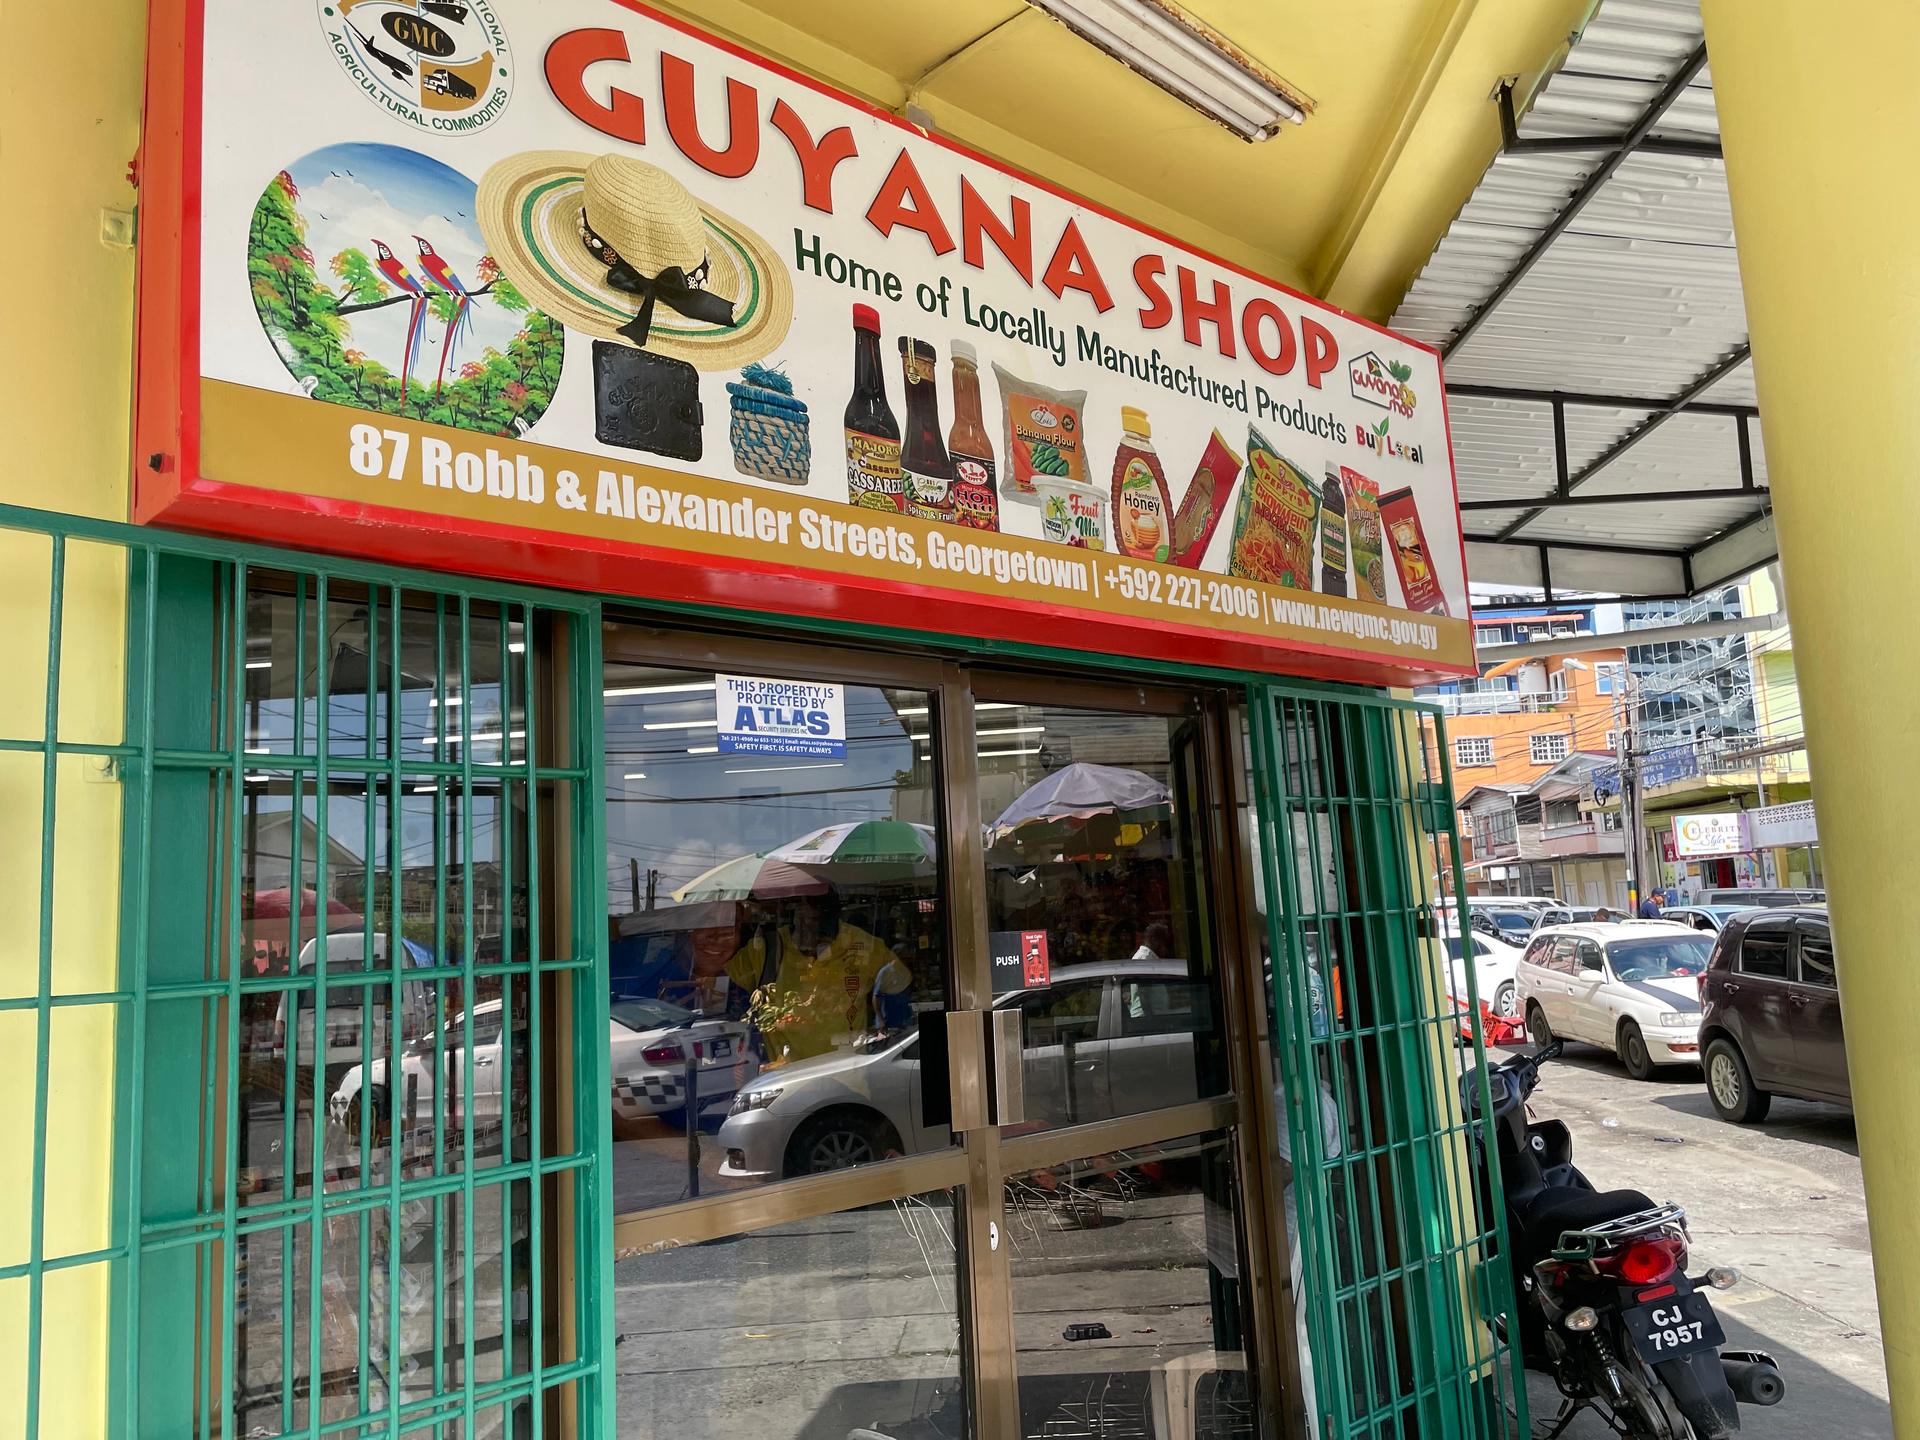 The Guyana Shop was put together by the attorney general and business boards to help small food businesses in Guyana package and sell their wares.